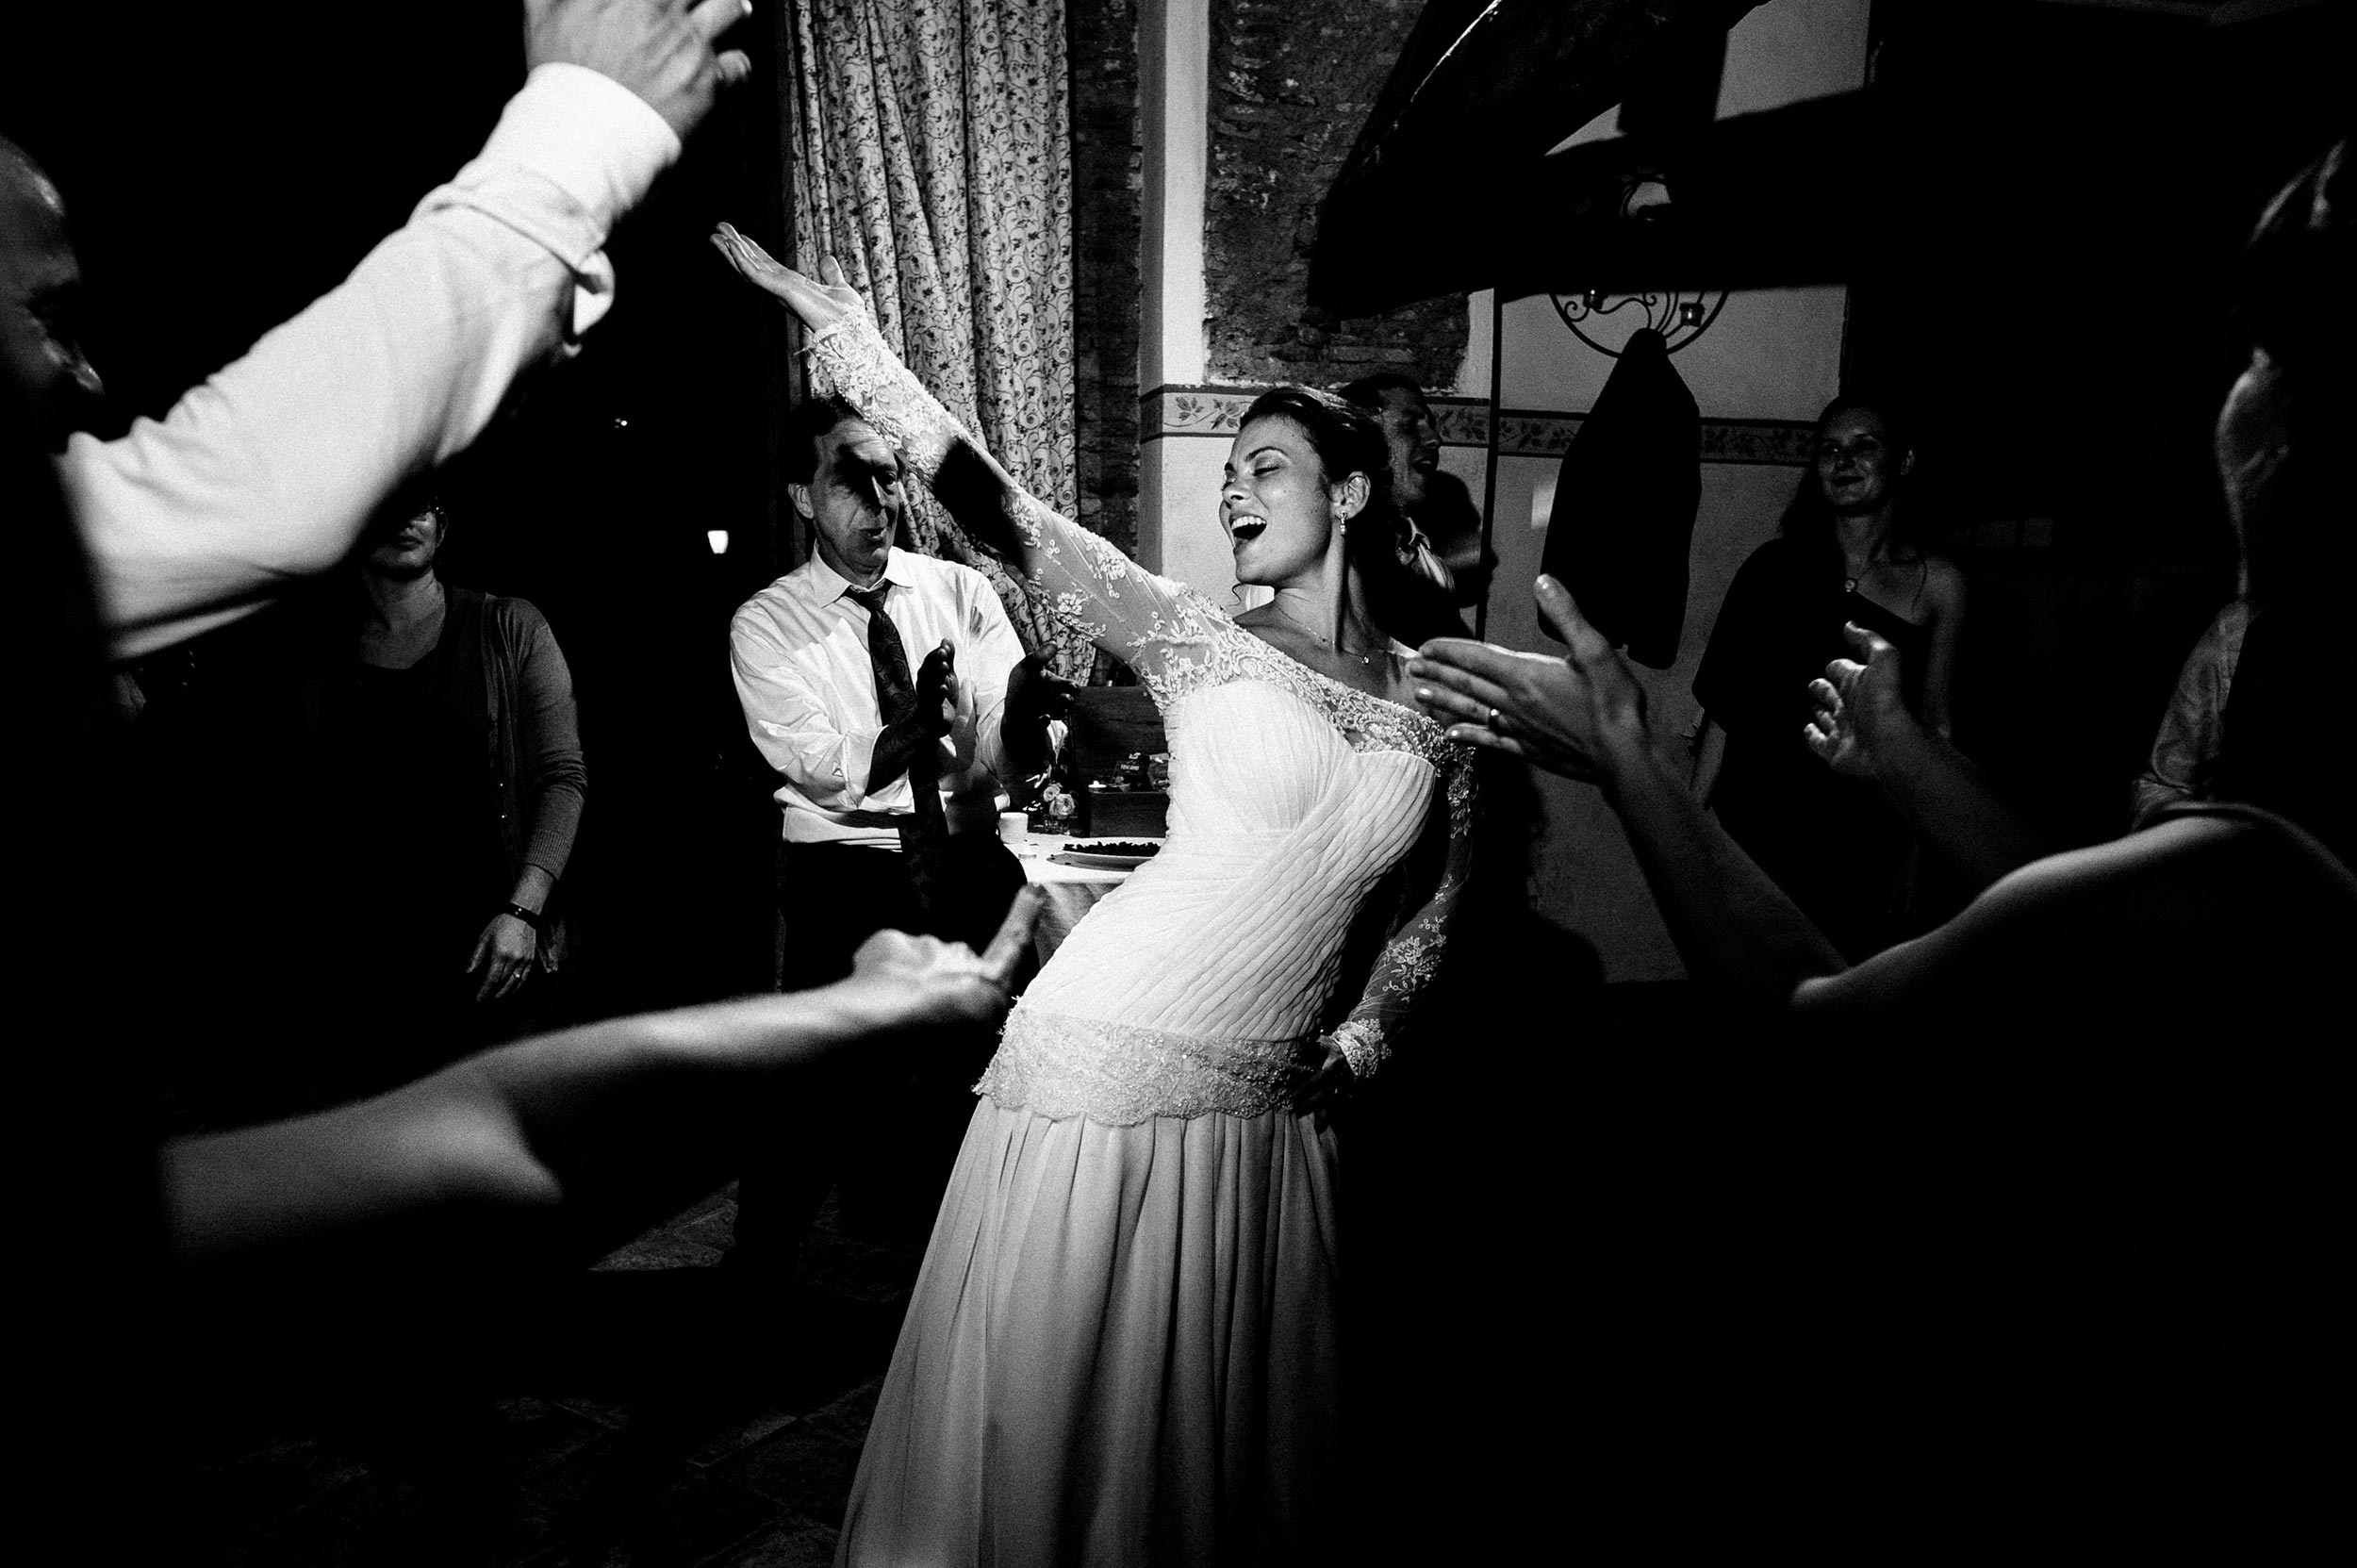 the-bride-dancing-at-night-wedding-in-rome-black-and-white-wedding-photography.jpg